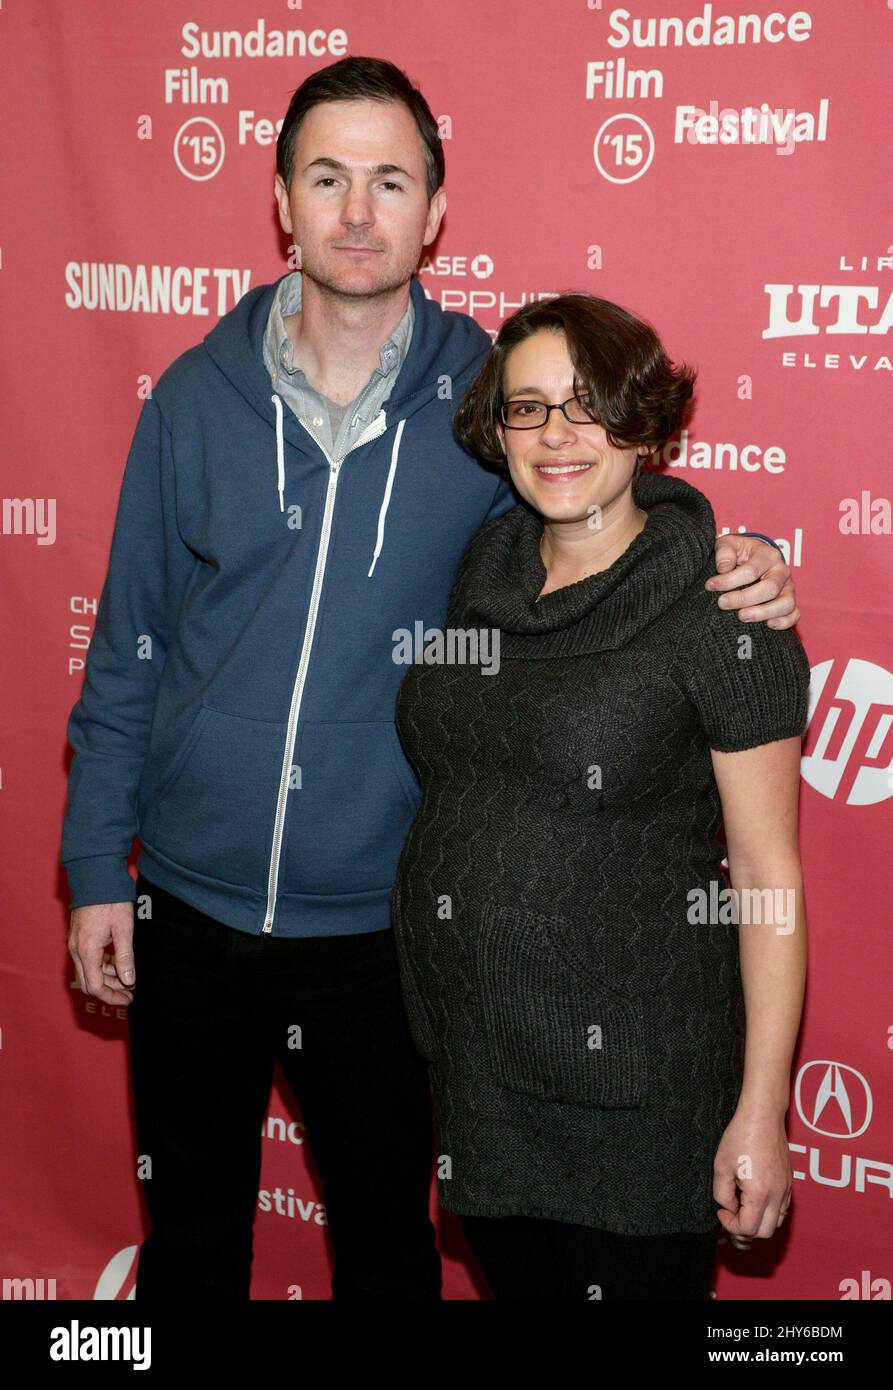 Ryan Fleck and Anna Boden attending the 2015 Sundance Film Festival Premiere of MISSISSIPPI GRIND held at the Eccles Theatre Stock Photo